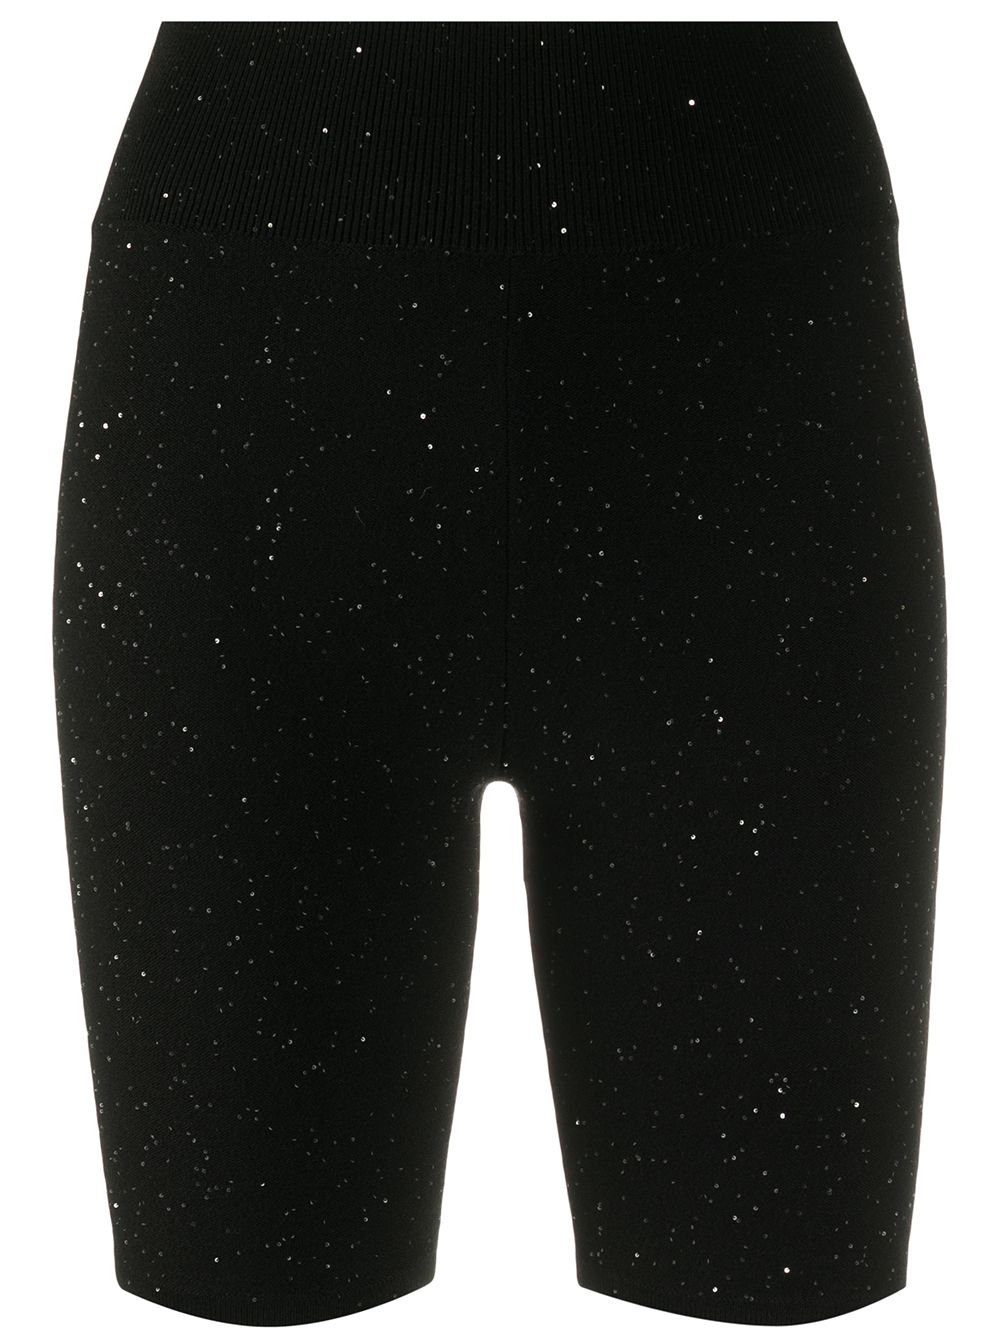 AREA SEQUINNED KNIT BICYCLE SHORTS